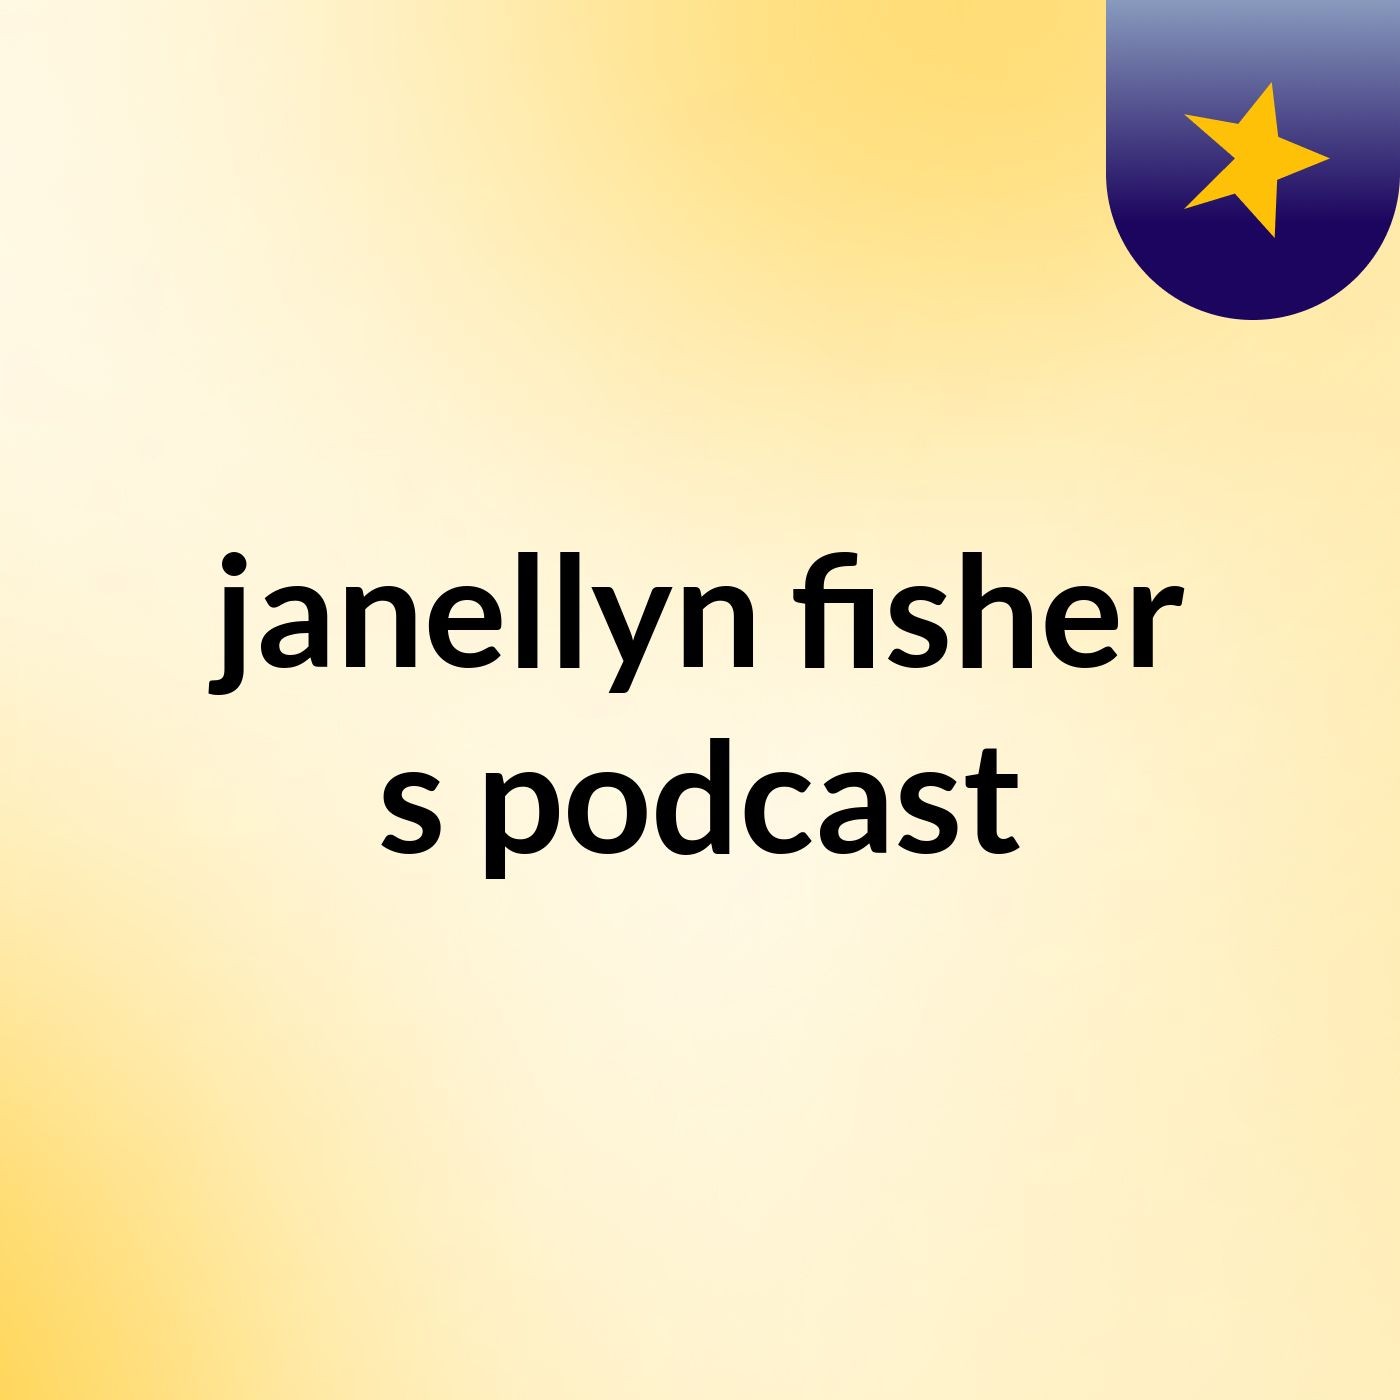 janellyn fisher's podcast